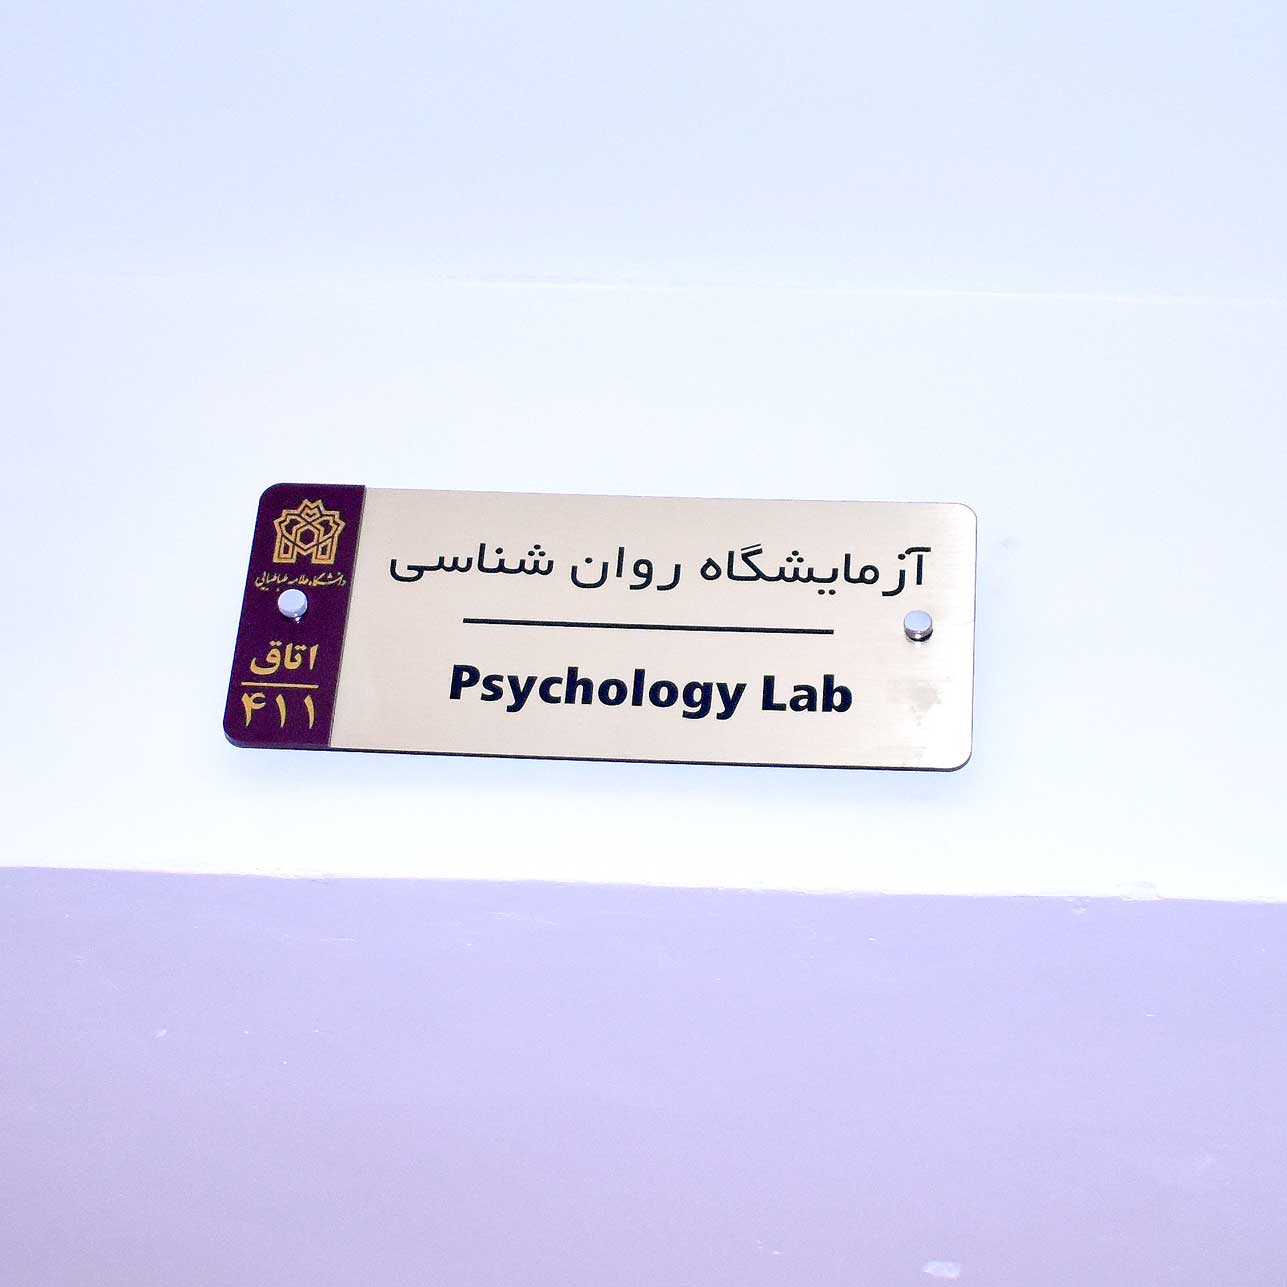 Psychology Laboratory, Faculty of Psychology and Education